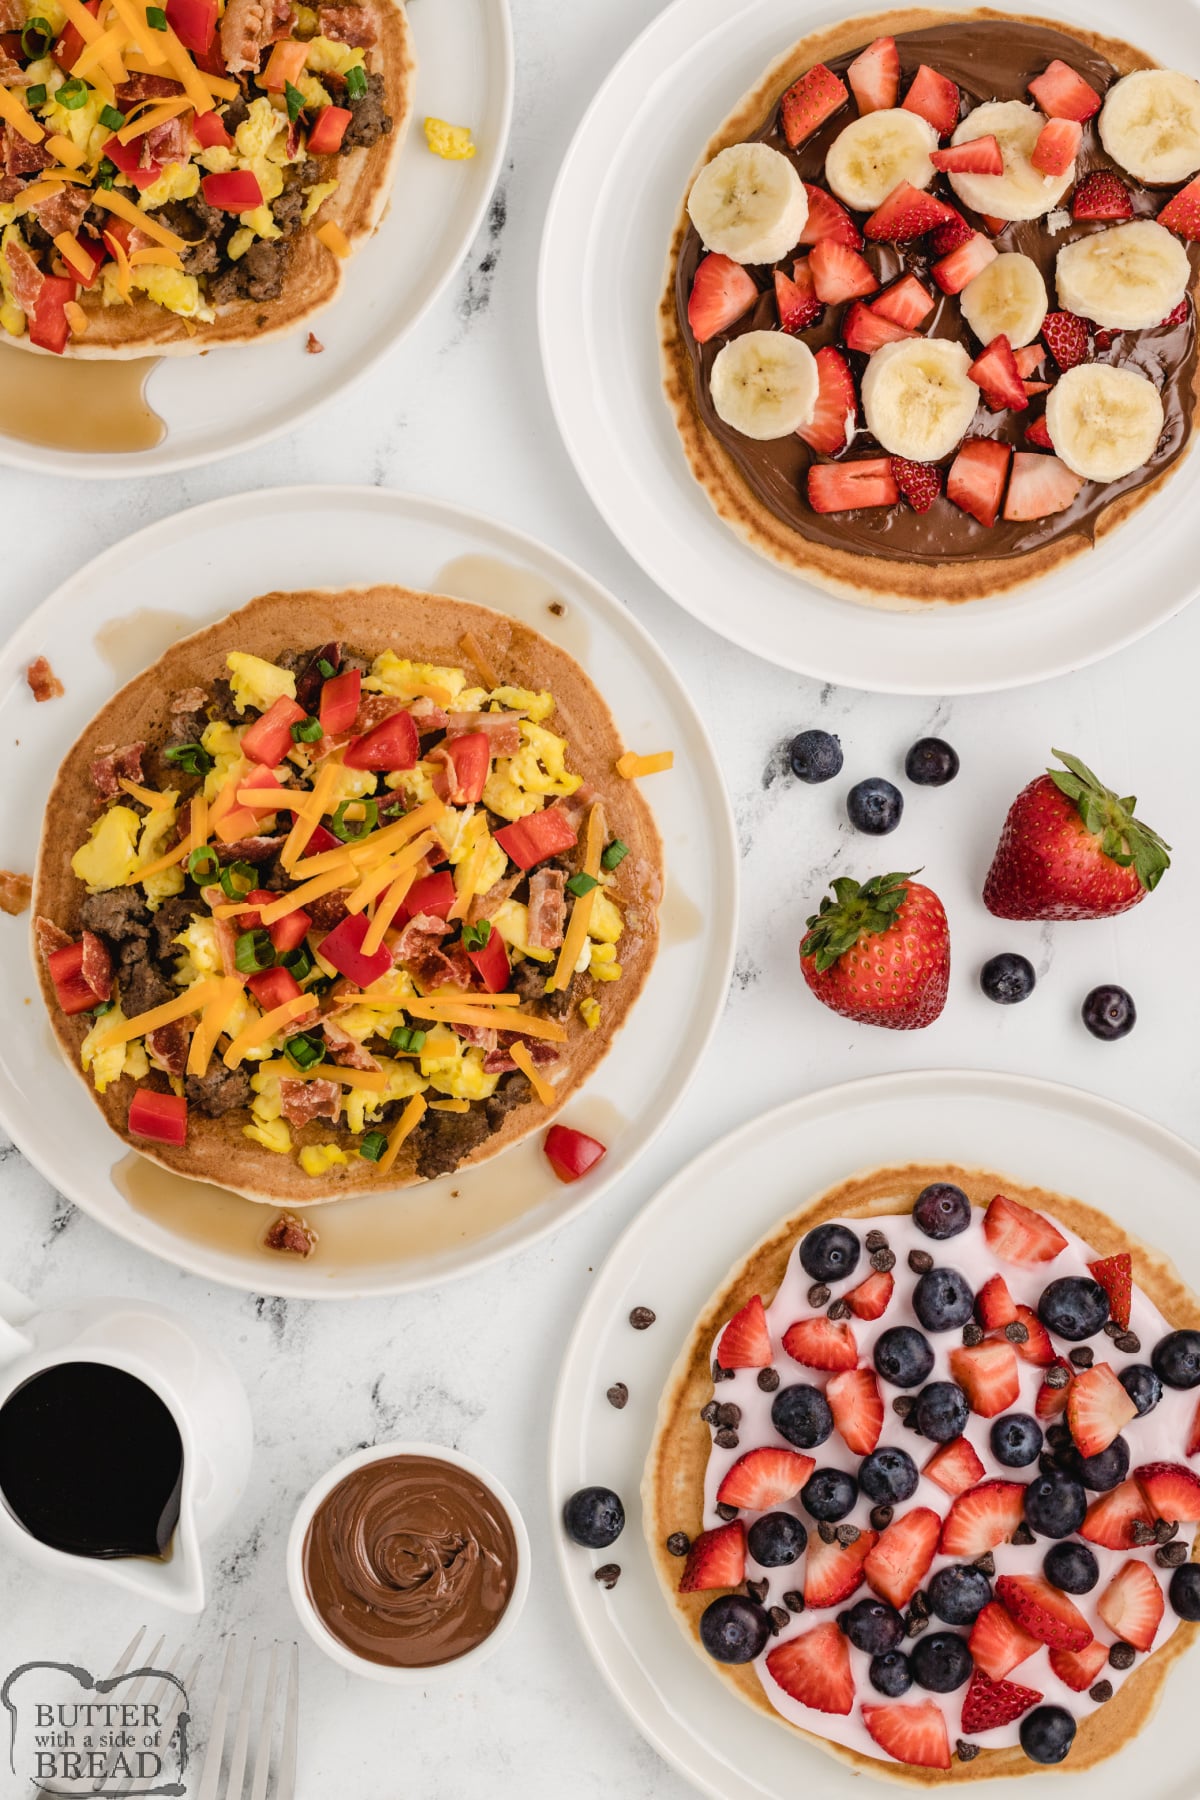 Serve these breakfast pancake pizzas with sweet or savory toppings, and they're sure to be loved either way. Everyone is sure to love this unique and fun twist on a breakfast classic.